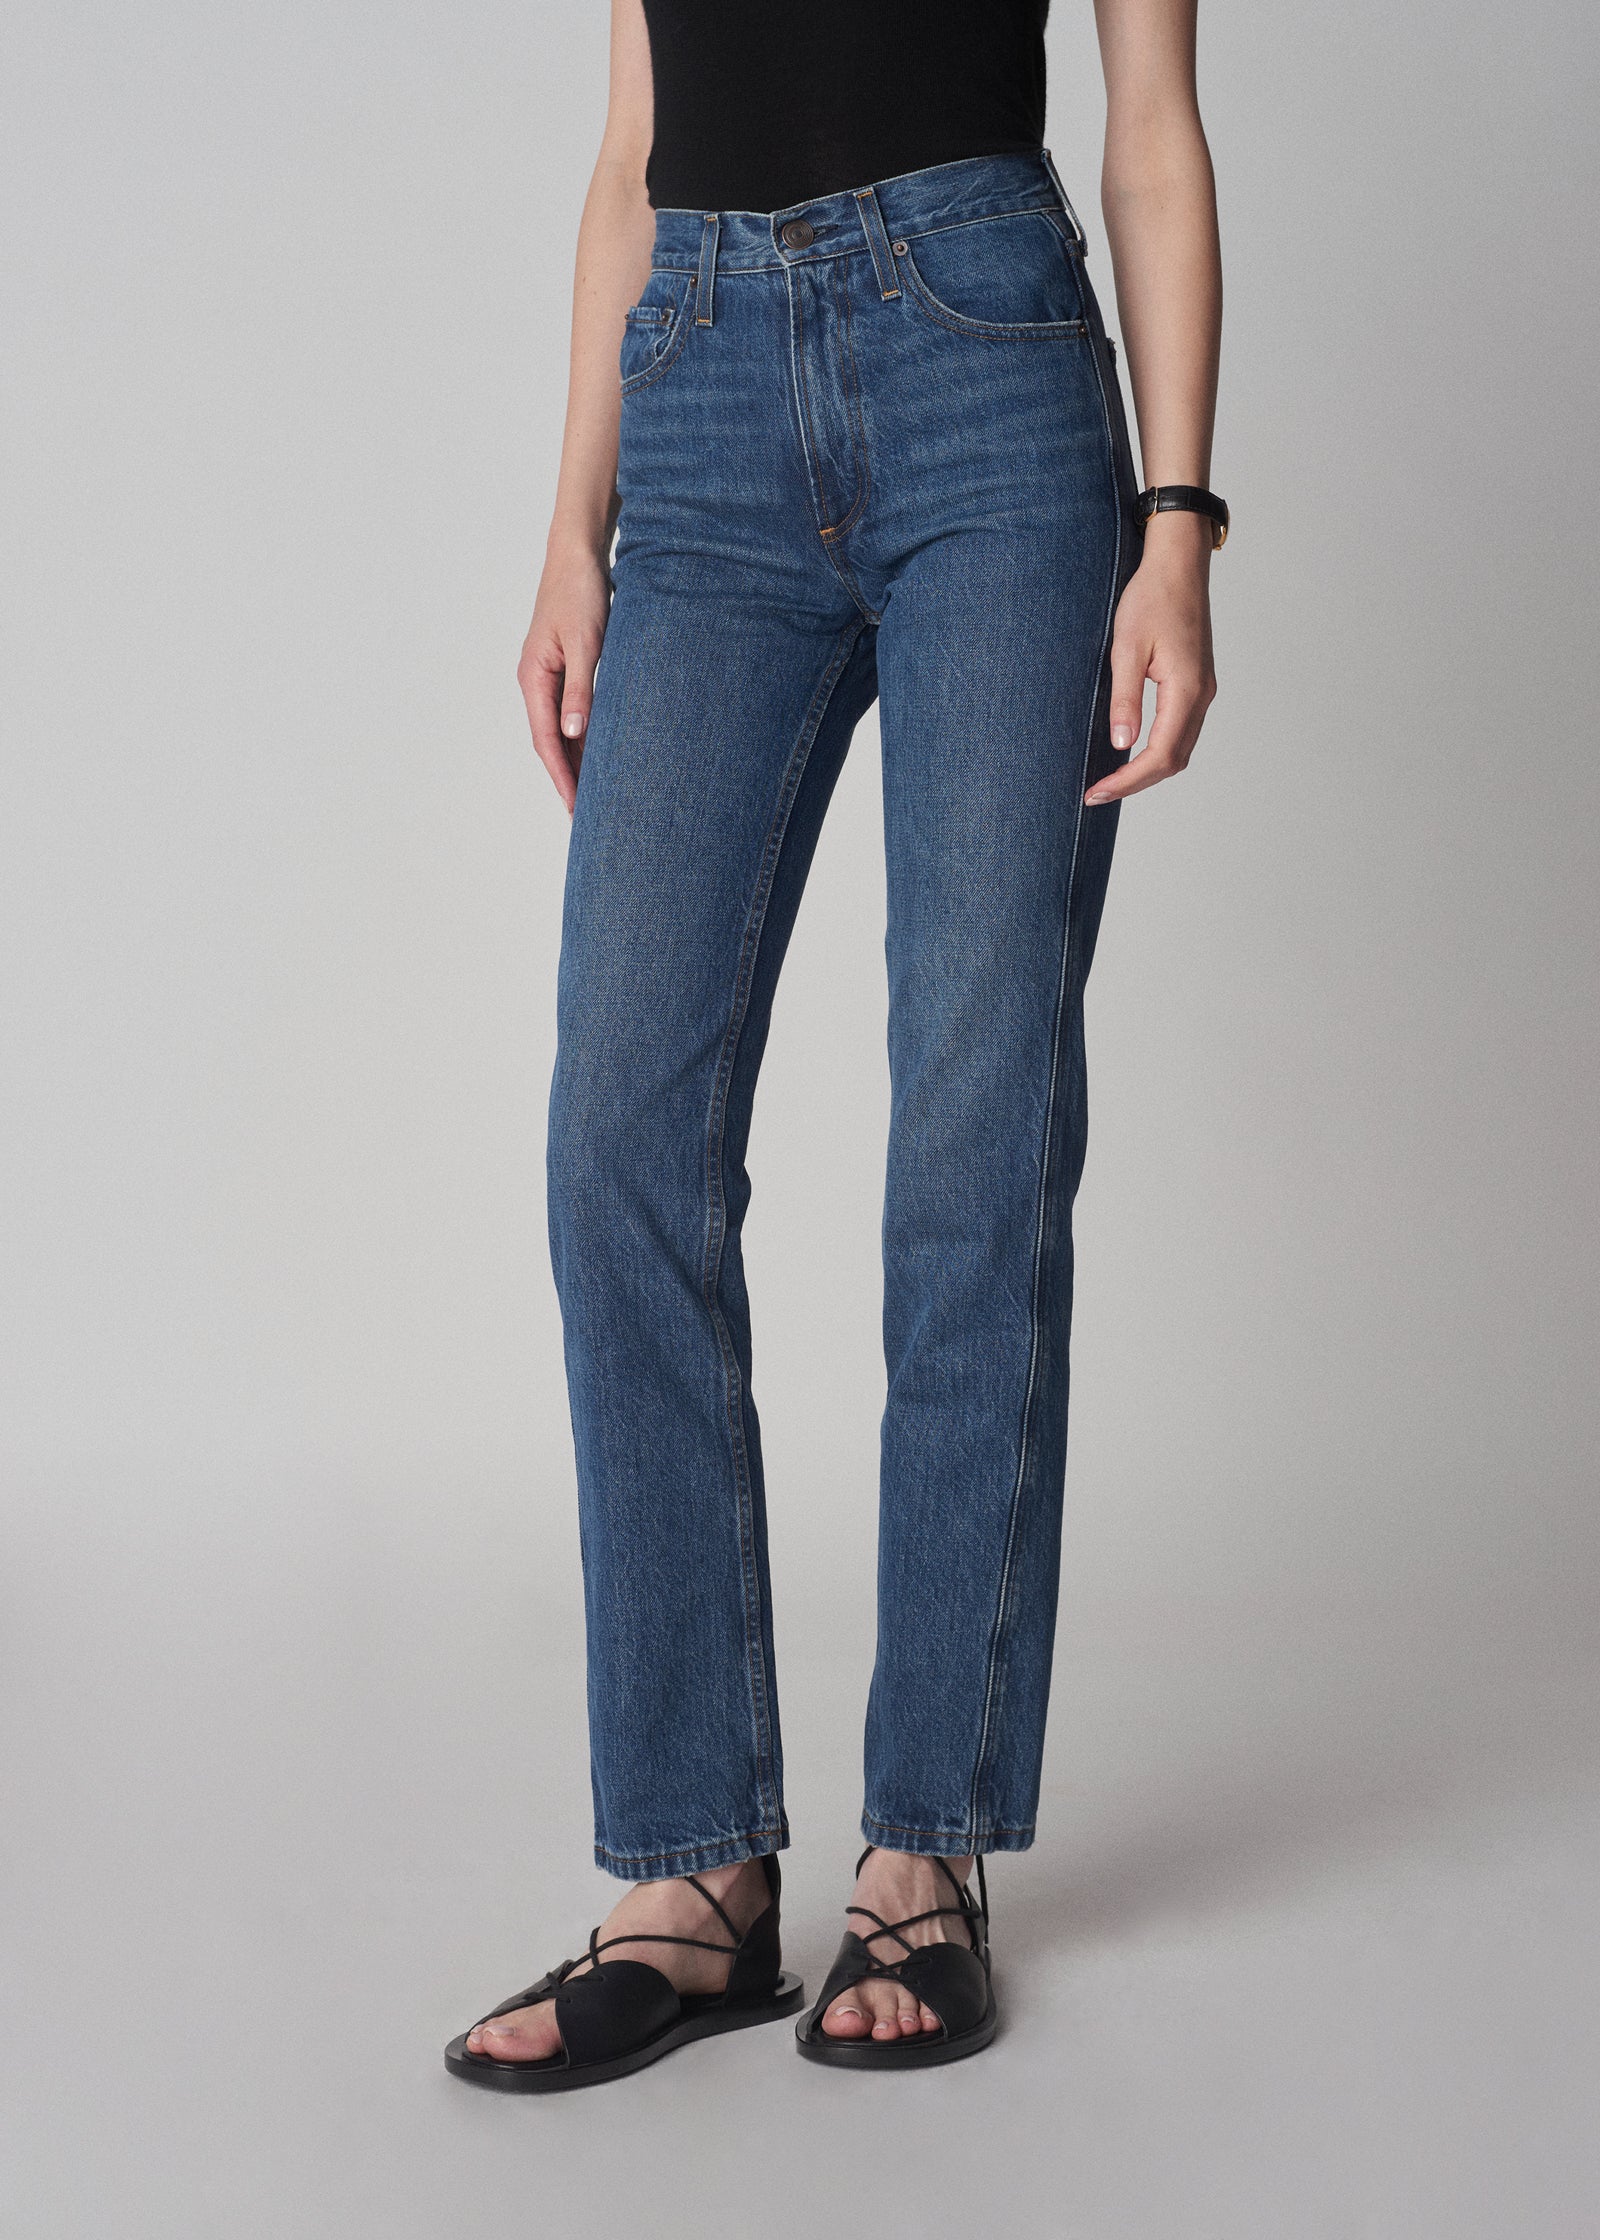 High Rise Jean in Denim - Indigo - CO Collections